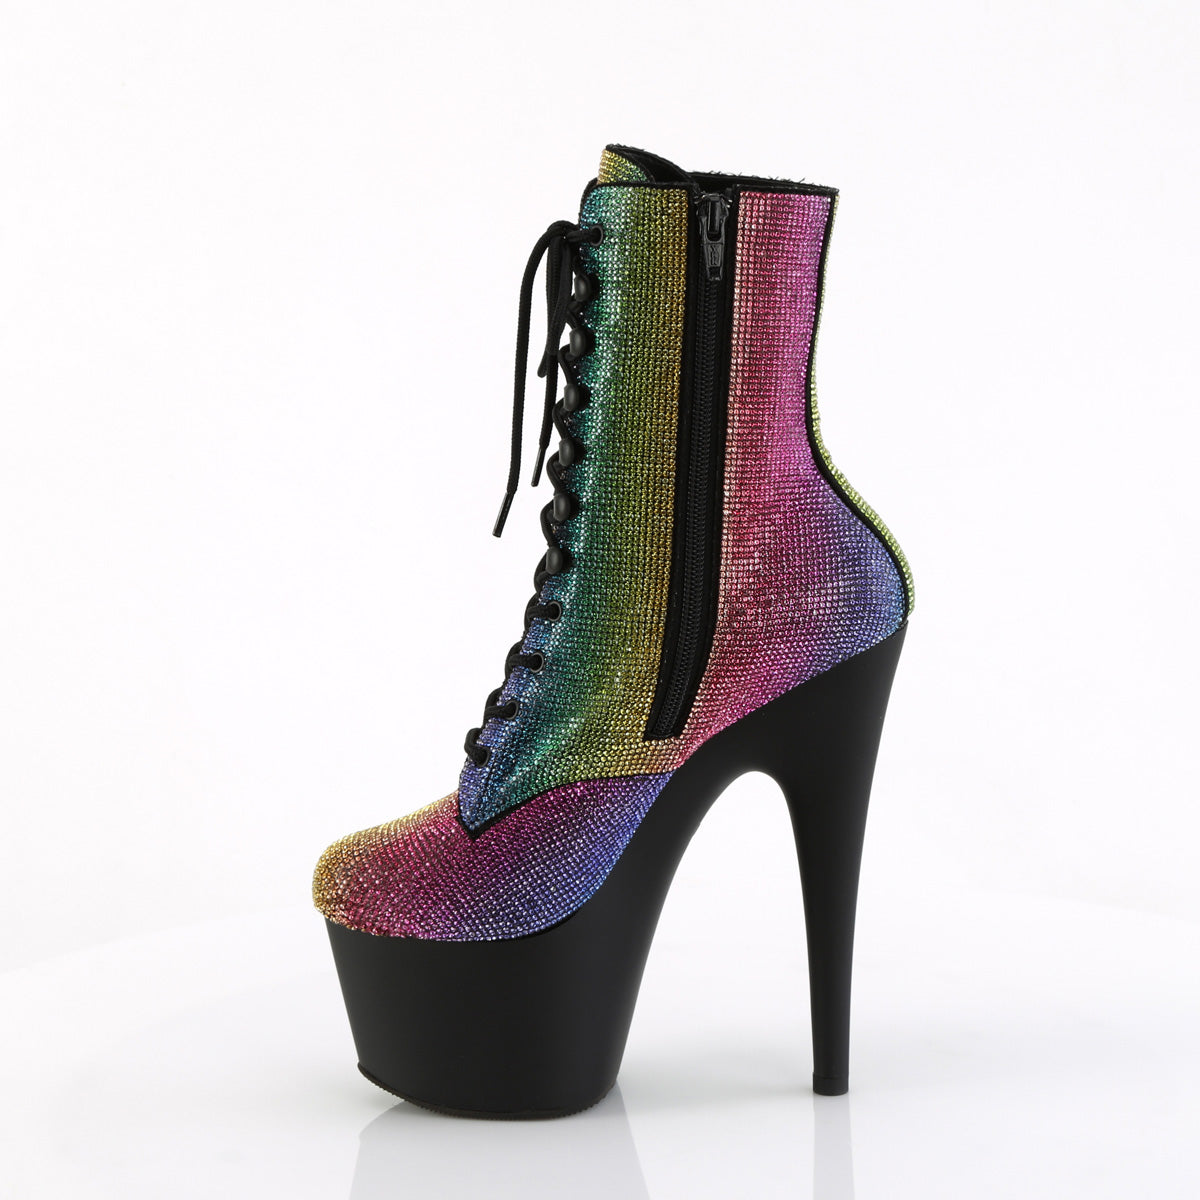 ADORE-1020RS Pleaser Rainbow Pride Bling Exotic Dancing Ankle Boots